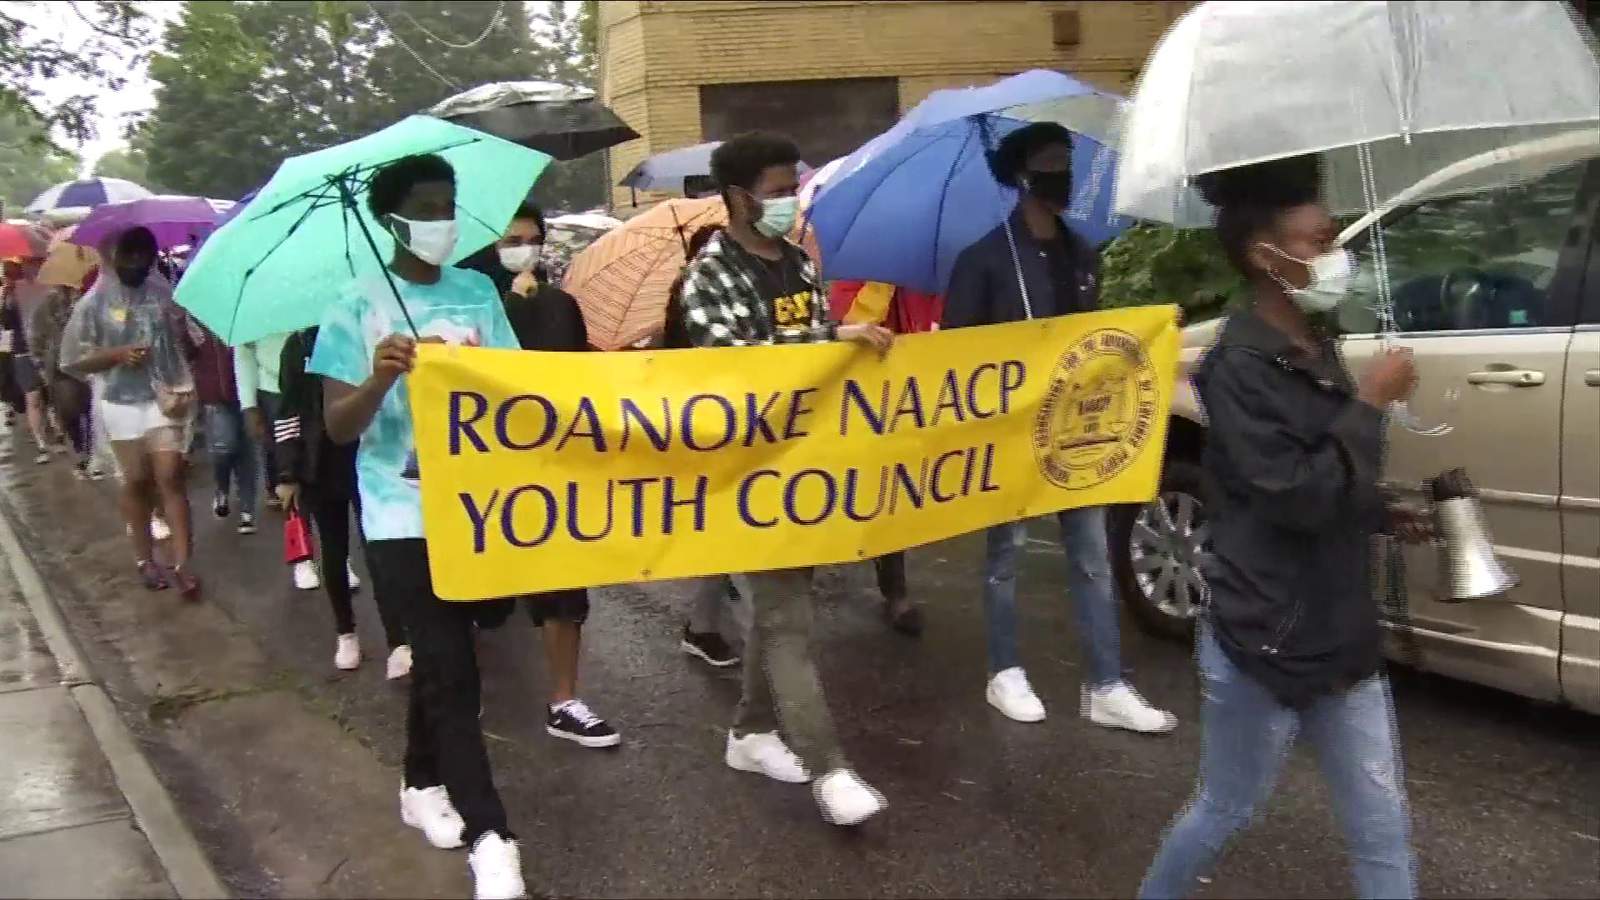 ‘I’m black inside and out, and proud of that’: Teenagers lead Juneteenth march in Roanoke